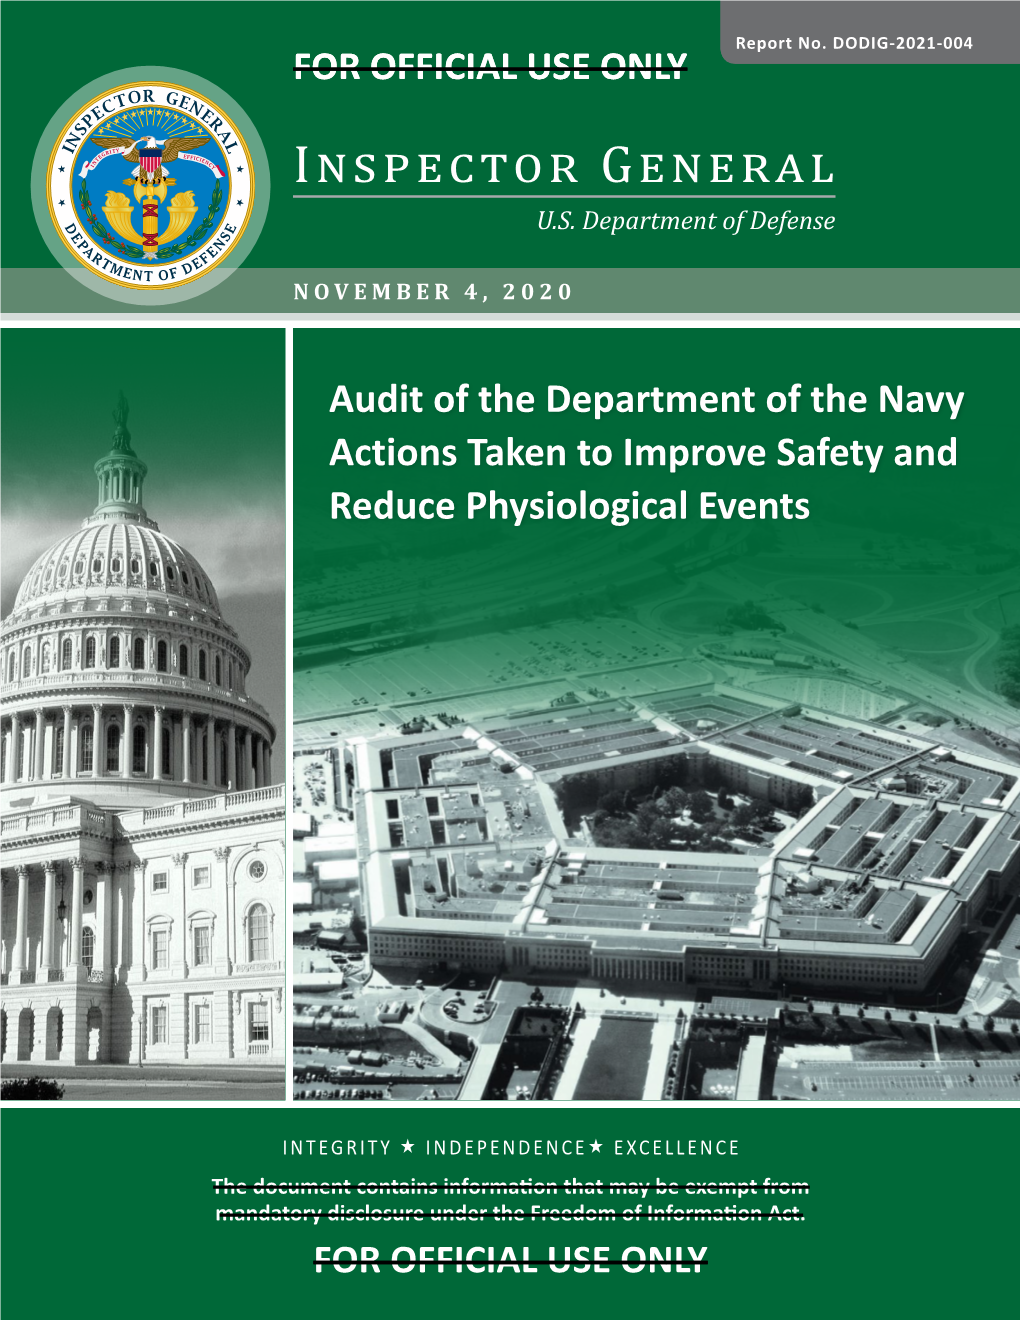 Report No. DODIG-2021-004: Audit of the Department of the Navy Actions